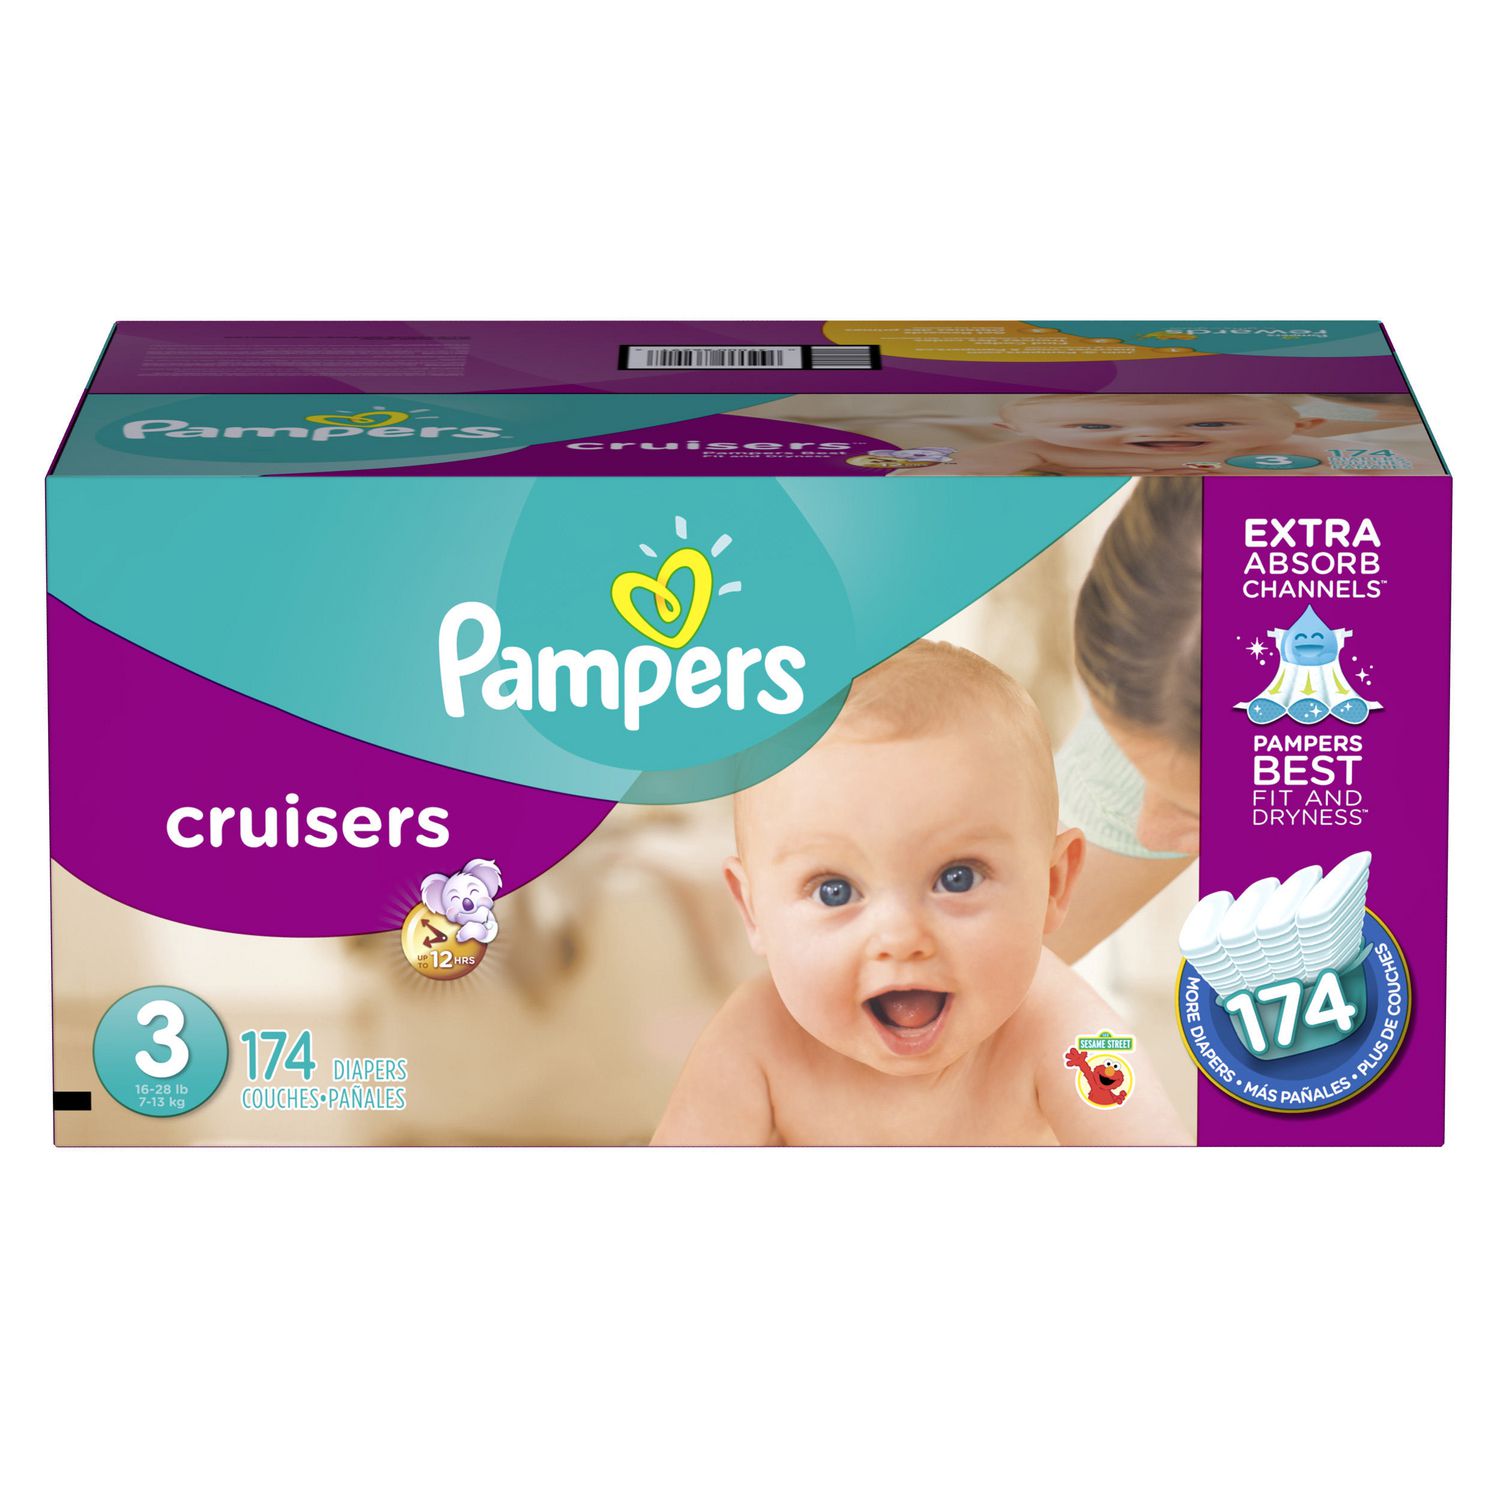 walmart pampers 360 size 4